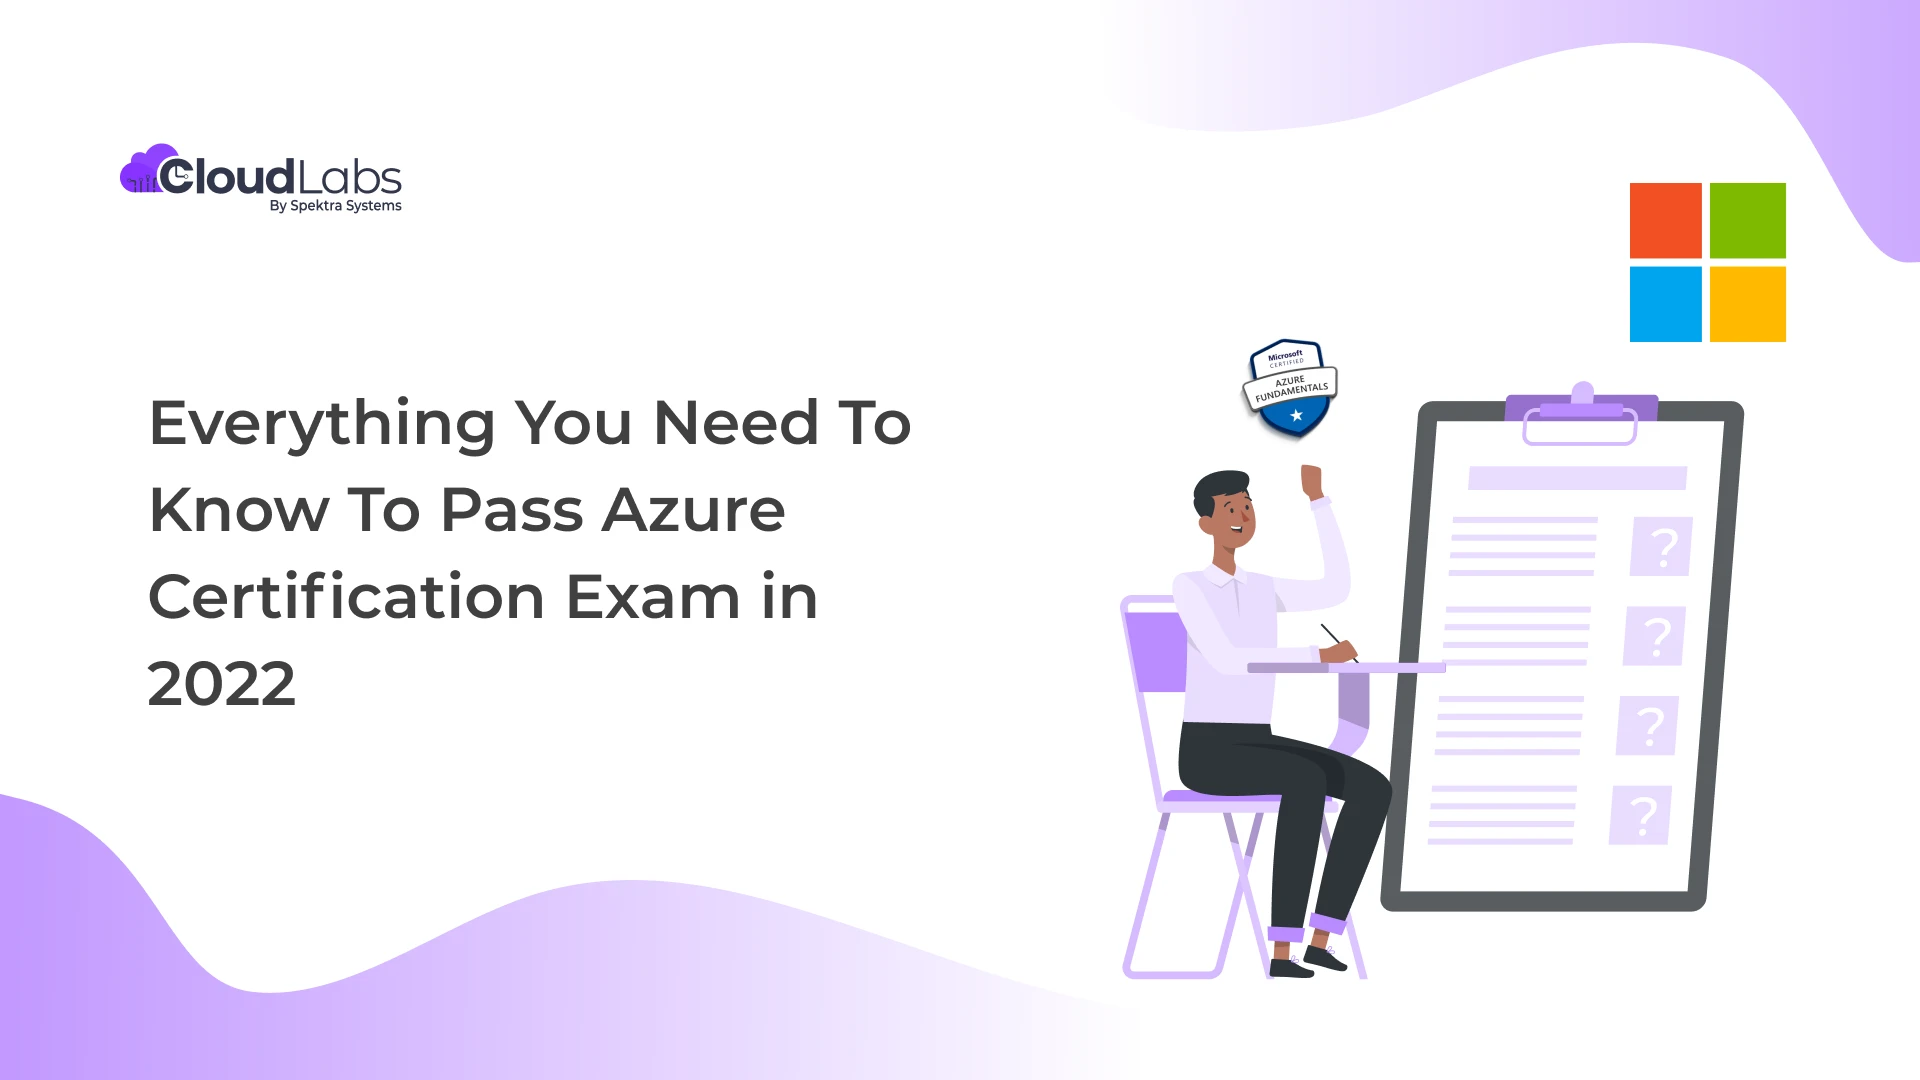 Everything You Need To Know To Pass Azure Certification Exam in 2022